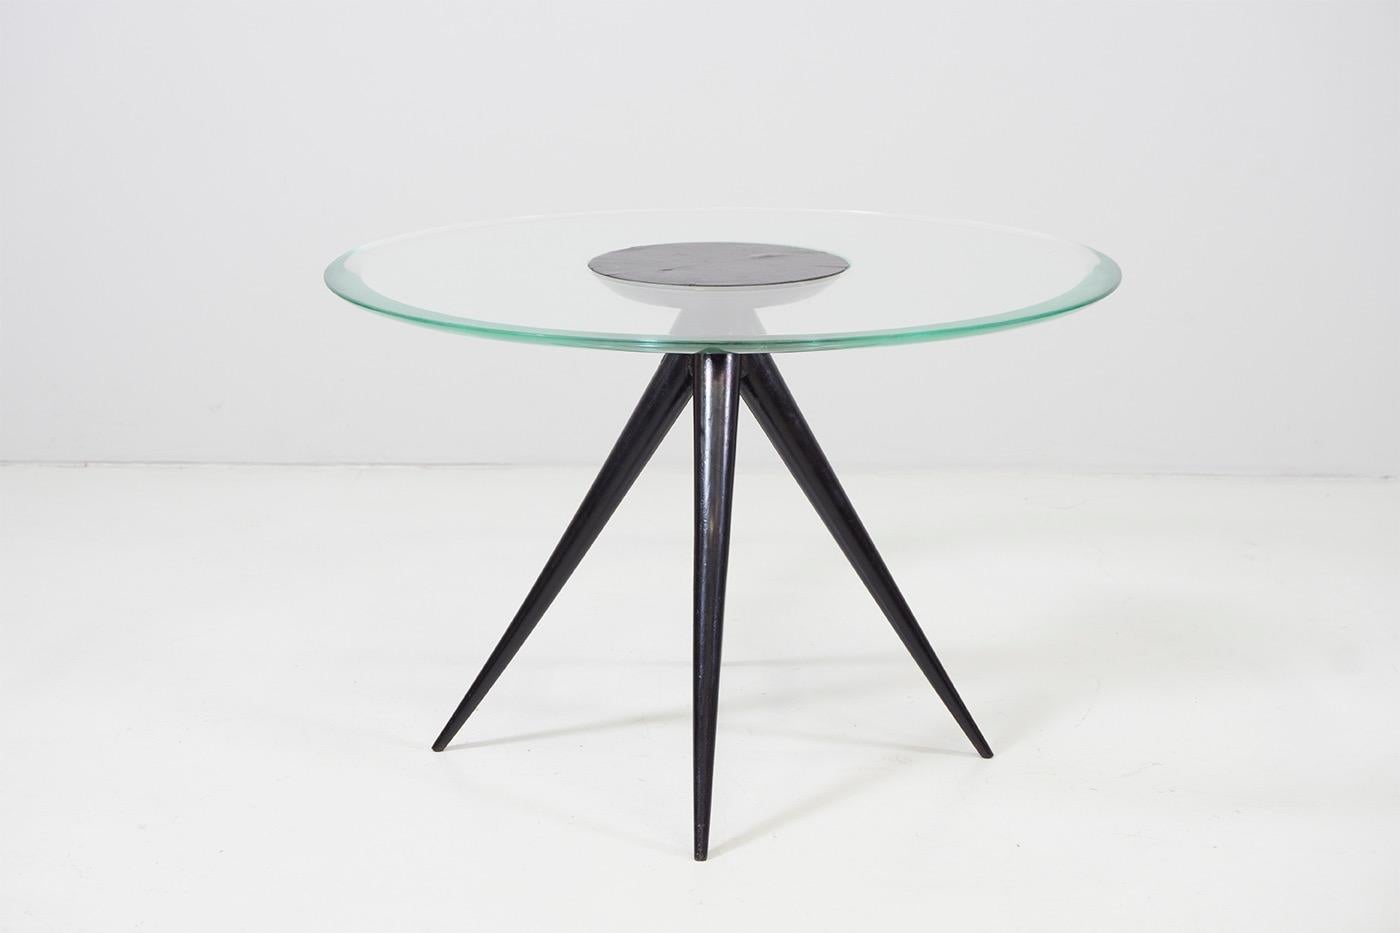 Chic round low table with black lacquered, wooden legs. Manufactured by Fontana Arte, designed by Pietro Chiesa.